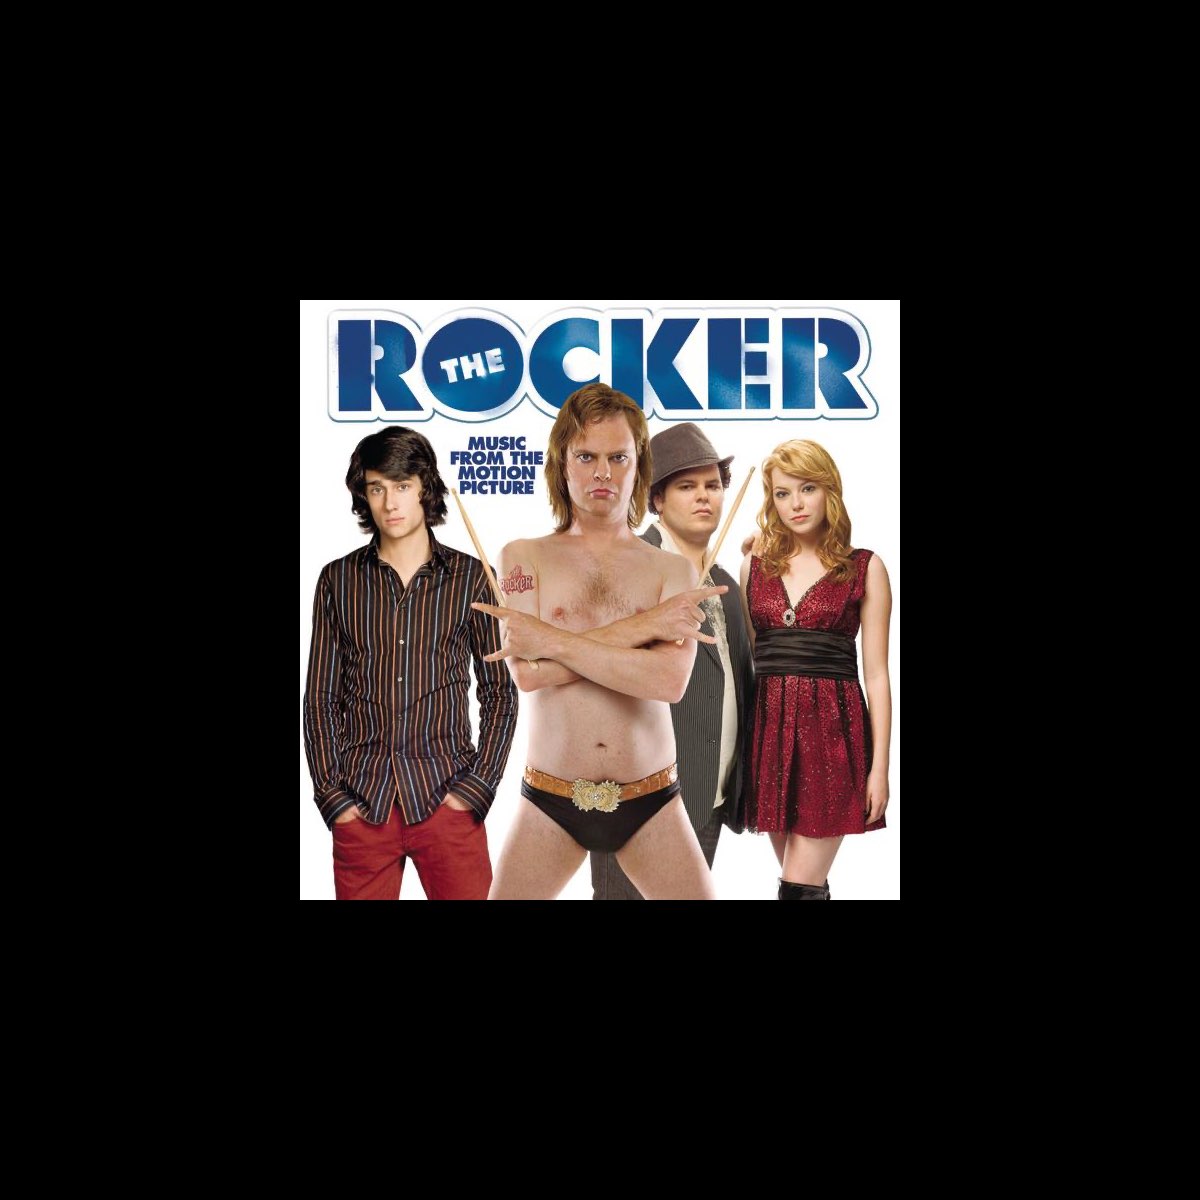 The Rocker (Music From The Motion Picture) - Album by Teddy Geiger